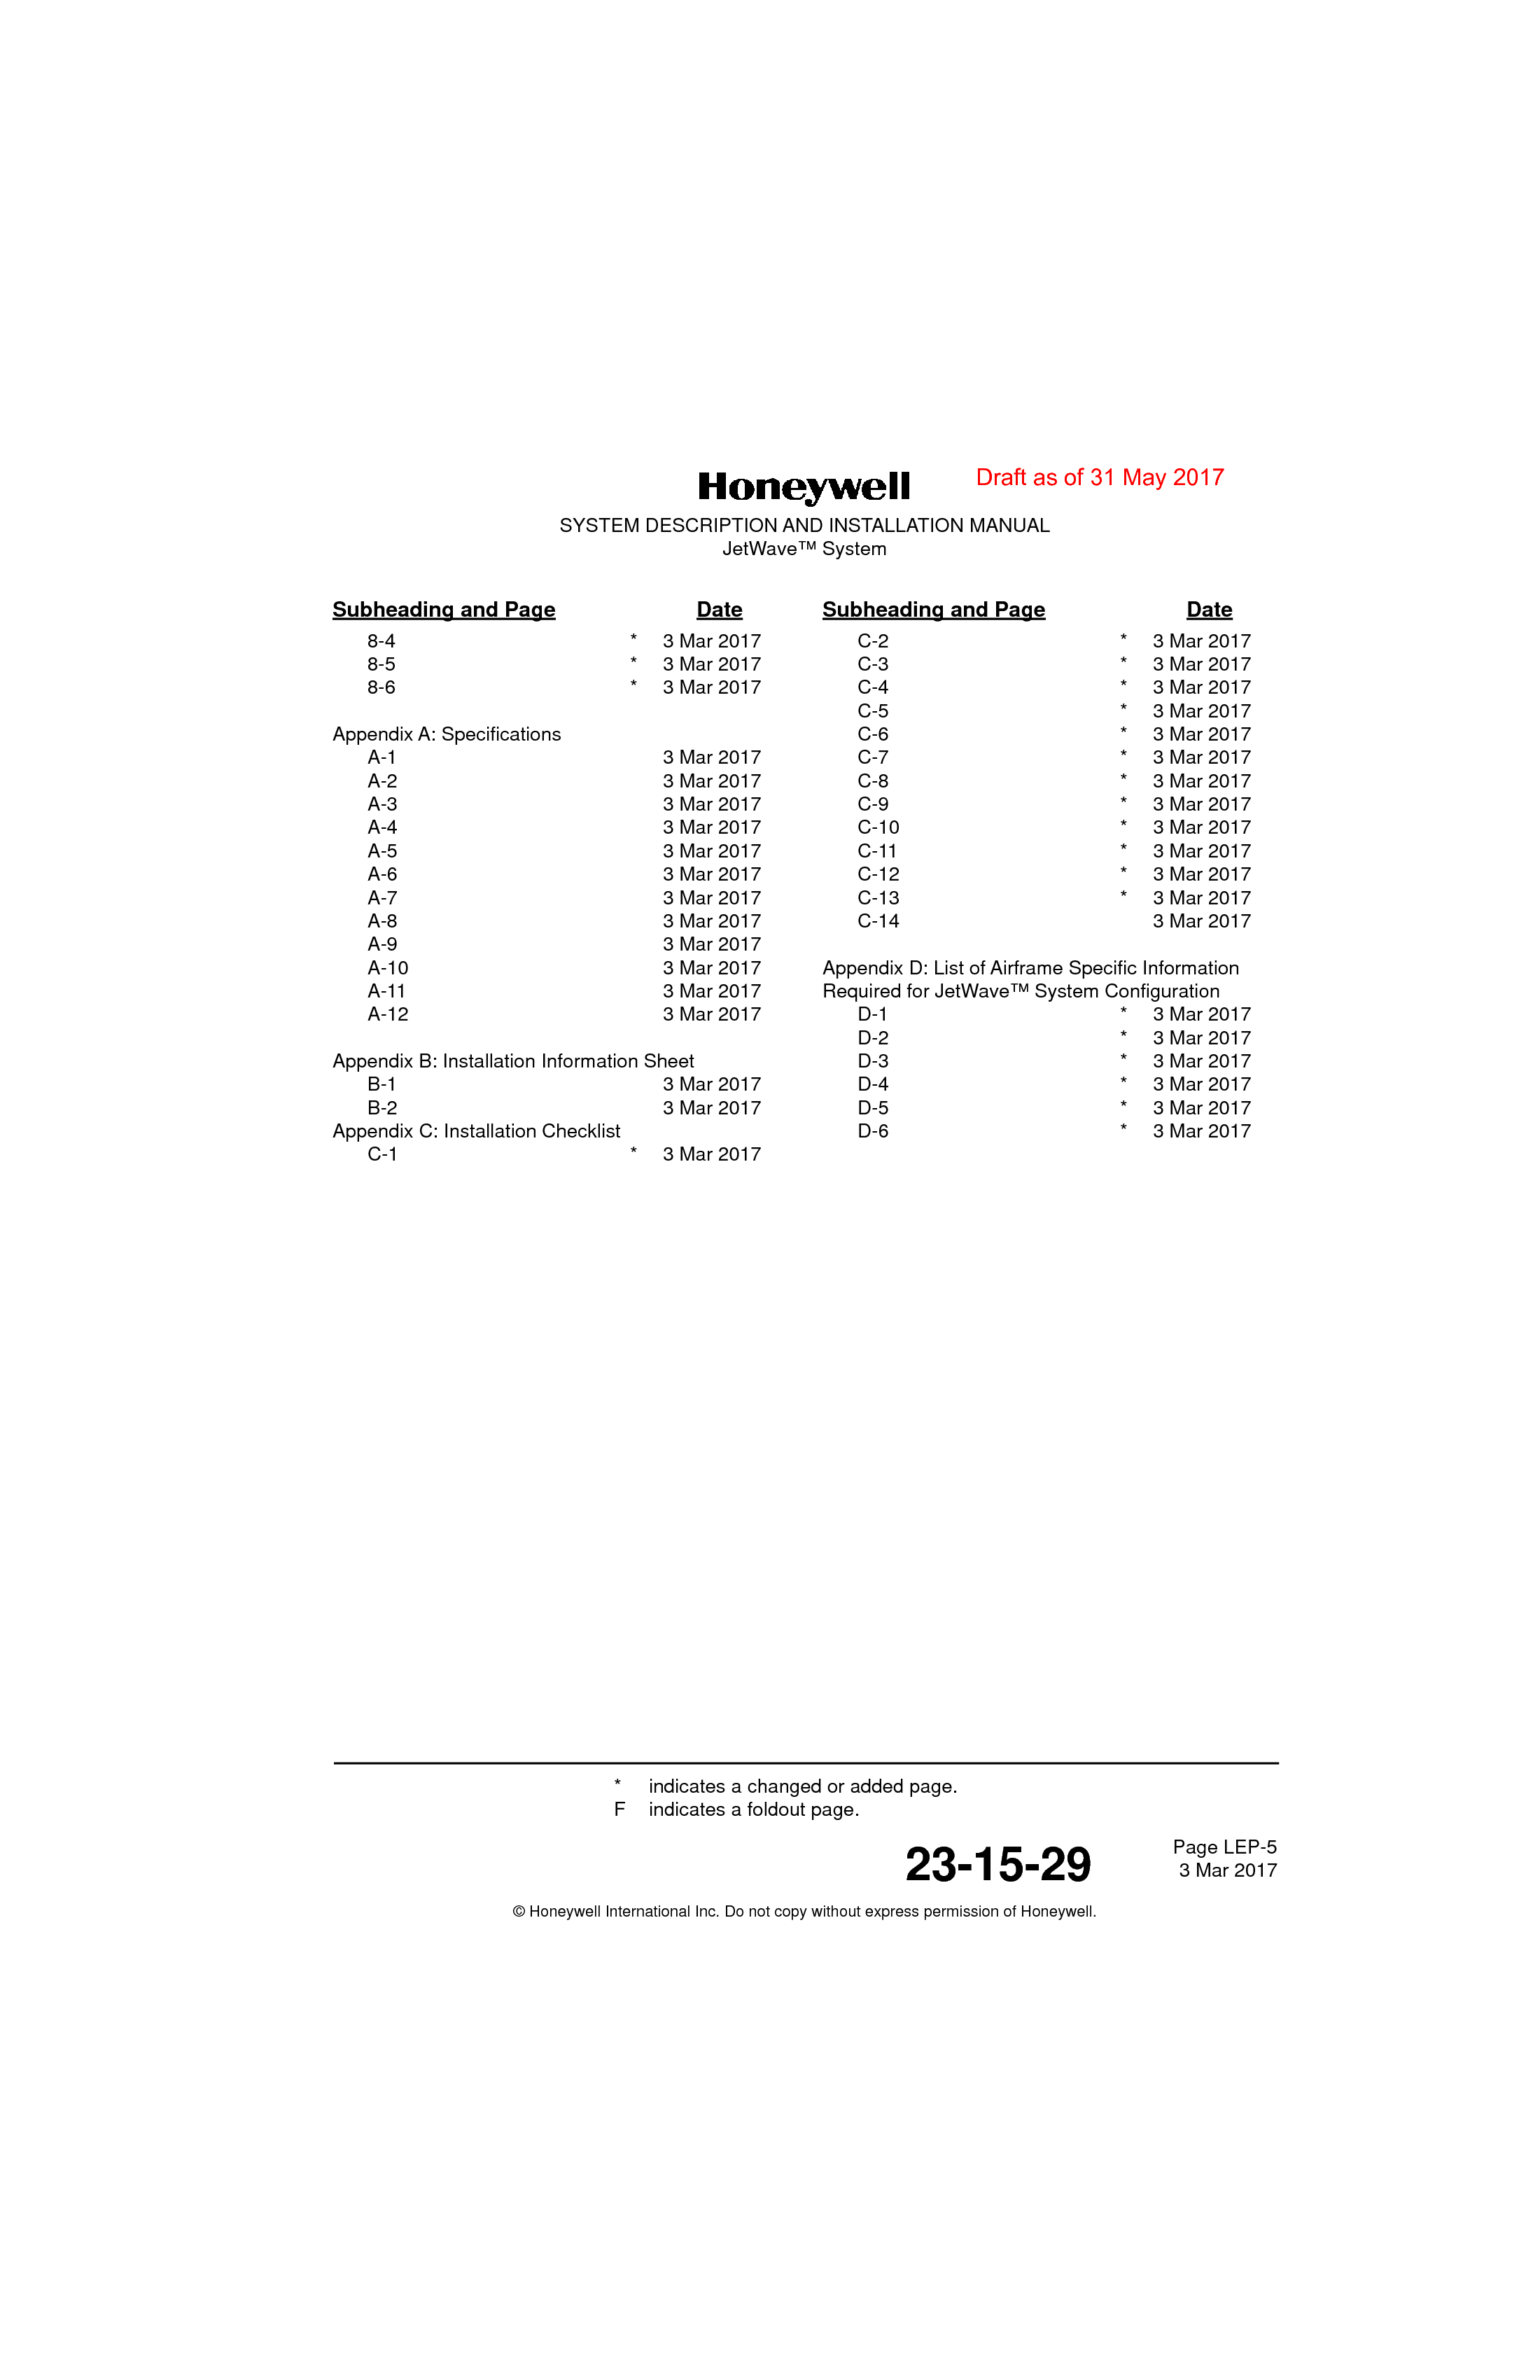 Page LEP-5 3 Mar 201723-15-29SYSTEM DESCRIPTION AND INSTALLATION MANUALJetWave™ System© Honeywell International Inc. Do not copy without express permission of Honeywell.Subheading and Page Date Subheading and Page Date* indicates a changed or added page.F indicates a foldout page.8-4 *  3 Mar 20178-5 *  3 Mar 20178-6 *  3 Mar 2017Appendix A: SpecificationsA-1  3 Mar 2017A-2  3 Mar 2017A-3  3 Mar 2017A-4  3 Mar 2017A-5  3 Mar 2017A-6  3 Mar 2017A-7  3 Mar 2017A-8  3 Mar 2017A-9  3 Mar 2017A-10  3 Mar 2017A-11  3 Mar 2017A-12  3 Mar 2017Appendix B: Installation Information SheetB-1  3 Mar 2017B-2  3 Mar 2017Appendix C: Installation ChecklistC-1 *  3 Mar 2017C-2 *  3 Mar 2017C-3 *  3 Mar 2017C-4 *  3 Mar 2017C-5 *  3 Mar 2017C-6 *  3 Mar 2017C-7 *  3 Mar 2017C-8 *  3 Mar 2017C-9 *  3 Mar 2017C-10 *  3 Mar 2017C-11 *  3 Mar 2017C-12 *  3 Mar 2017C-13 *  3 Mar 2017C-14  3 Mar 2017Appendix D: List of Airframe Specific Information  Required for JetWave™ System ConfigurationD-1 *  3 Mar 2017D-2 *  3 Mar 2017D-3 *  3 Mar 2017D-4 *  3 Mar 2017D-5 *  3 Mar 2017D-6 *  3 Mar 2017Draft as of 31 May 2017